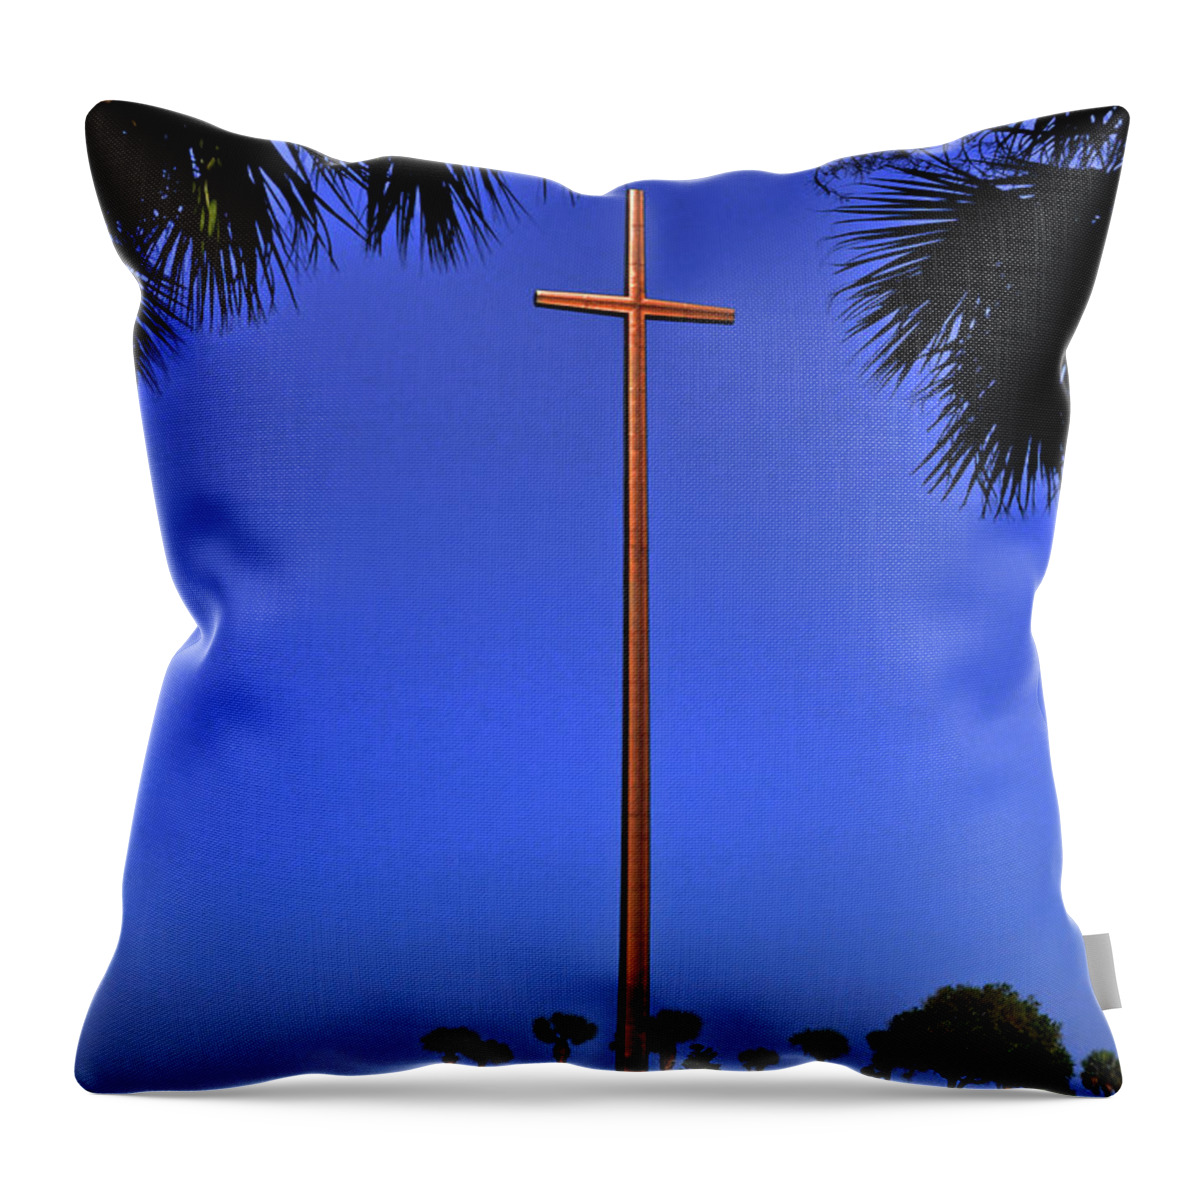 St Augustine Throw Pillow featuring the photograph St Augustine Memorial Cross 011 by George Bostian